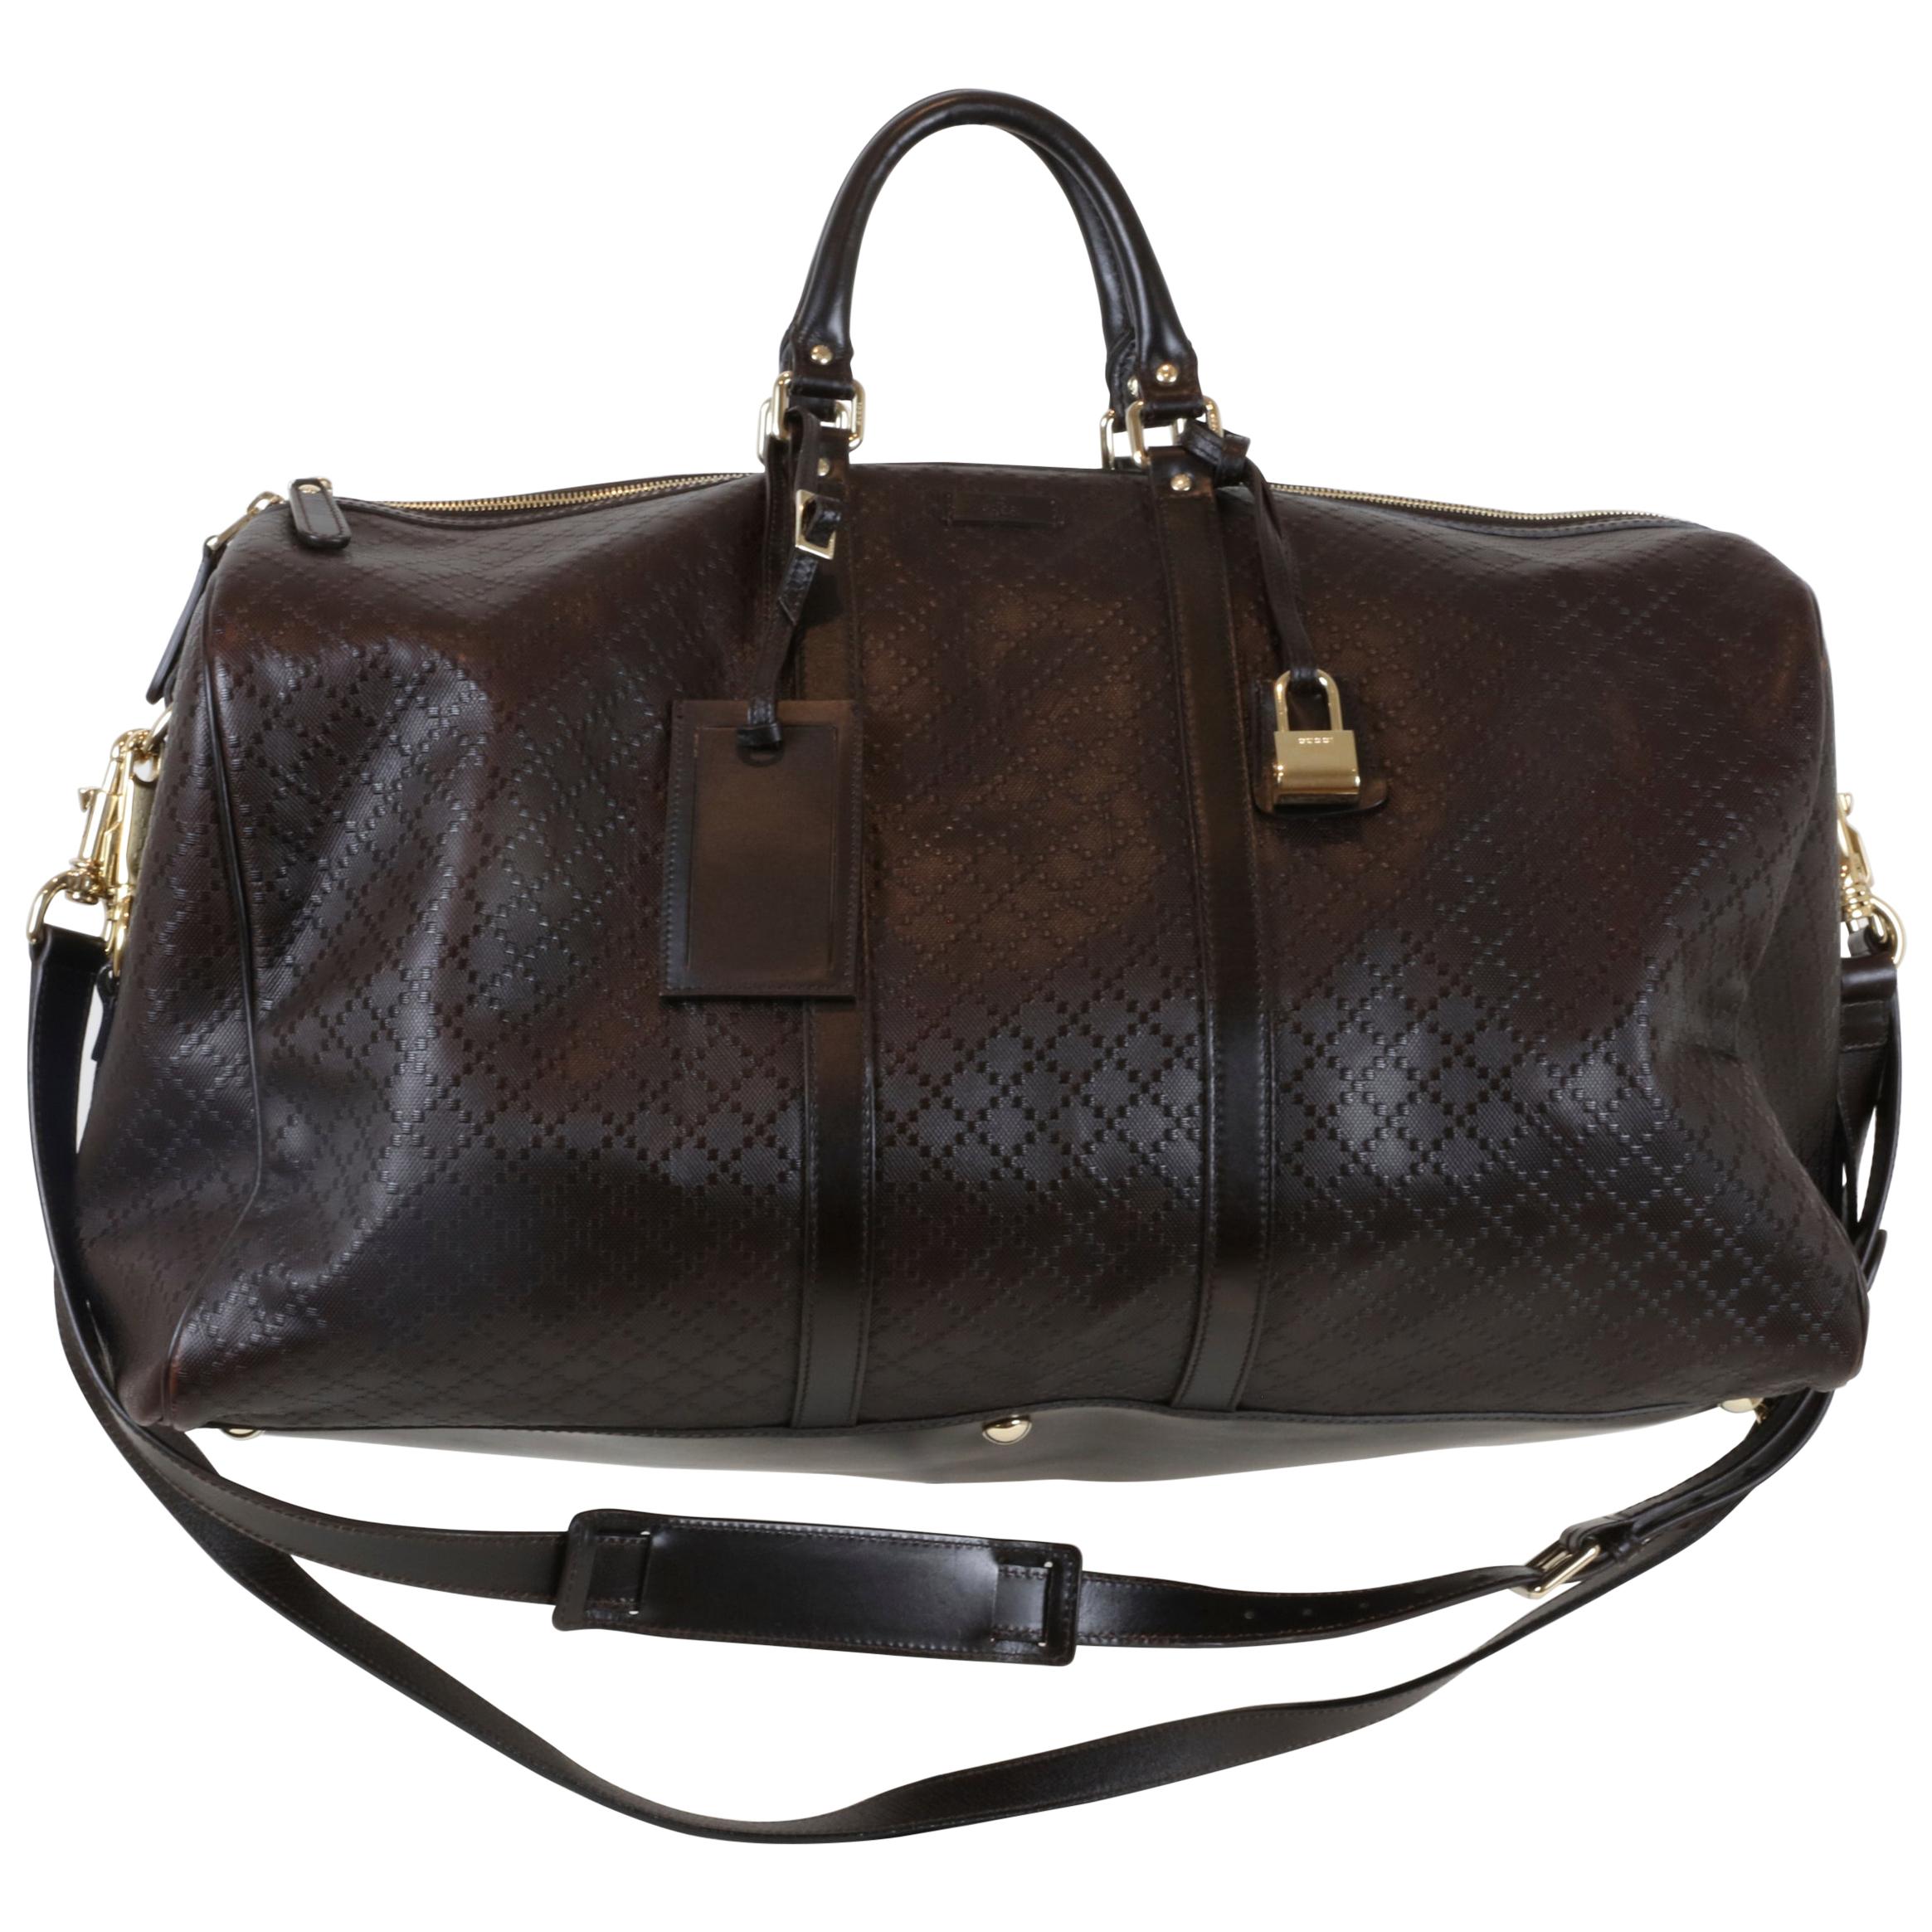 Gucci Leather Brown Overnight Bag with Handles & Gold Hardware